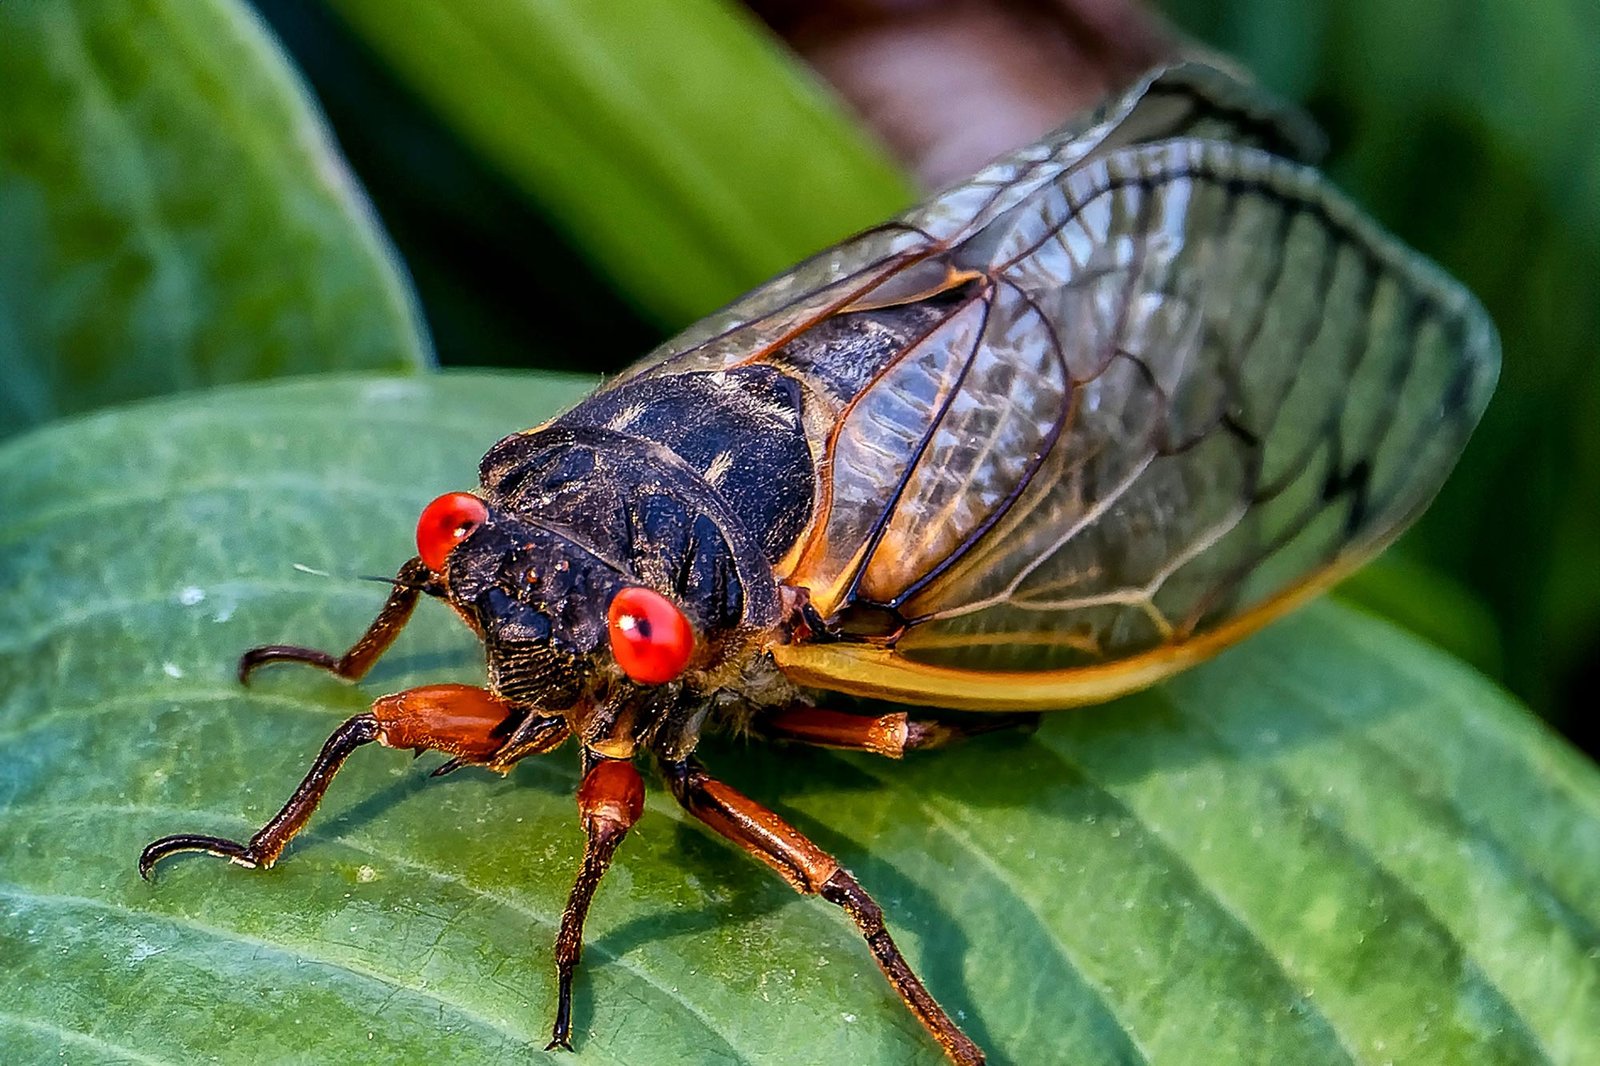 * Jet-Powered Cicada Urination Redefines the Rules of Fluid Dynamics